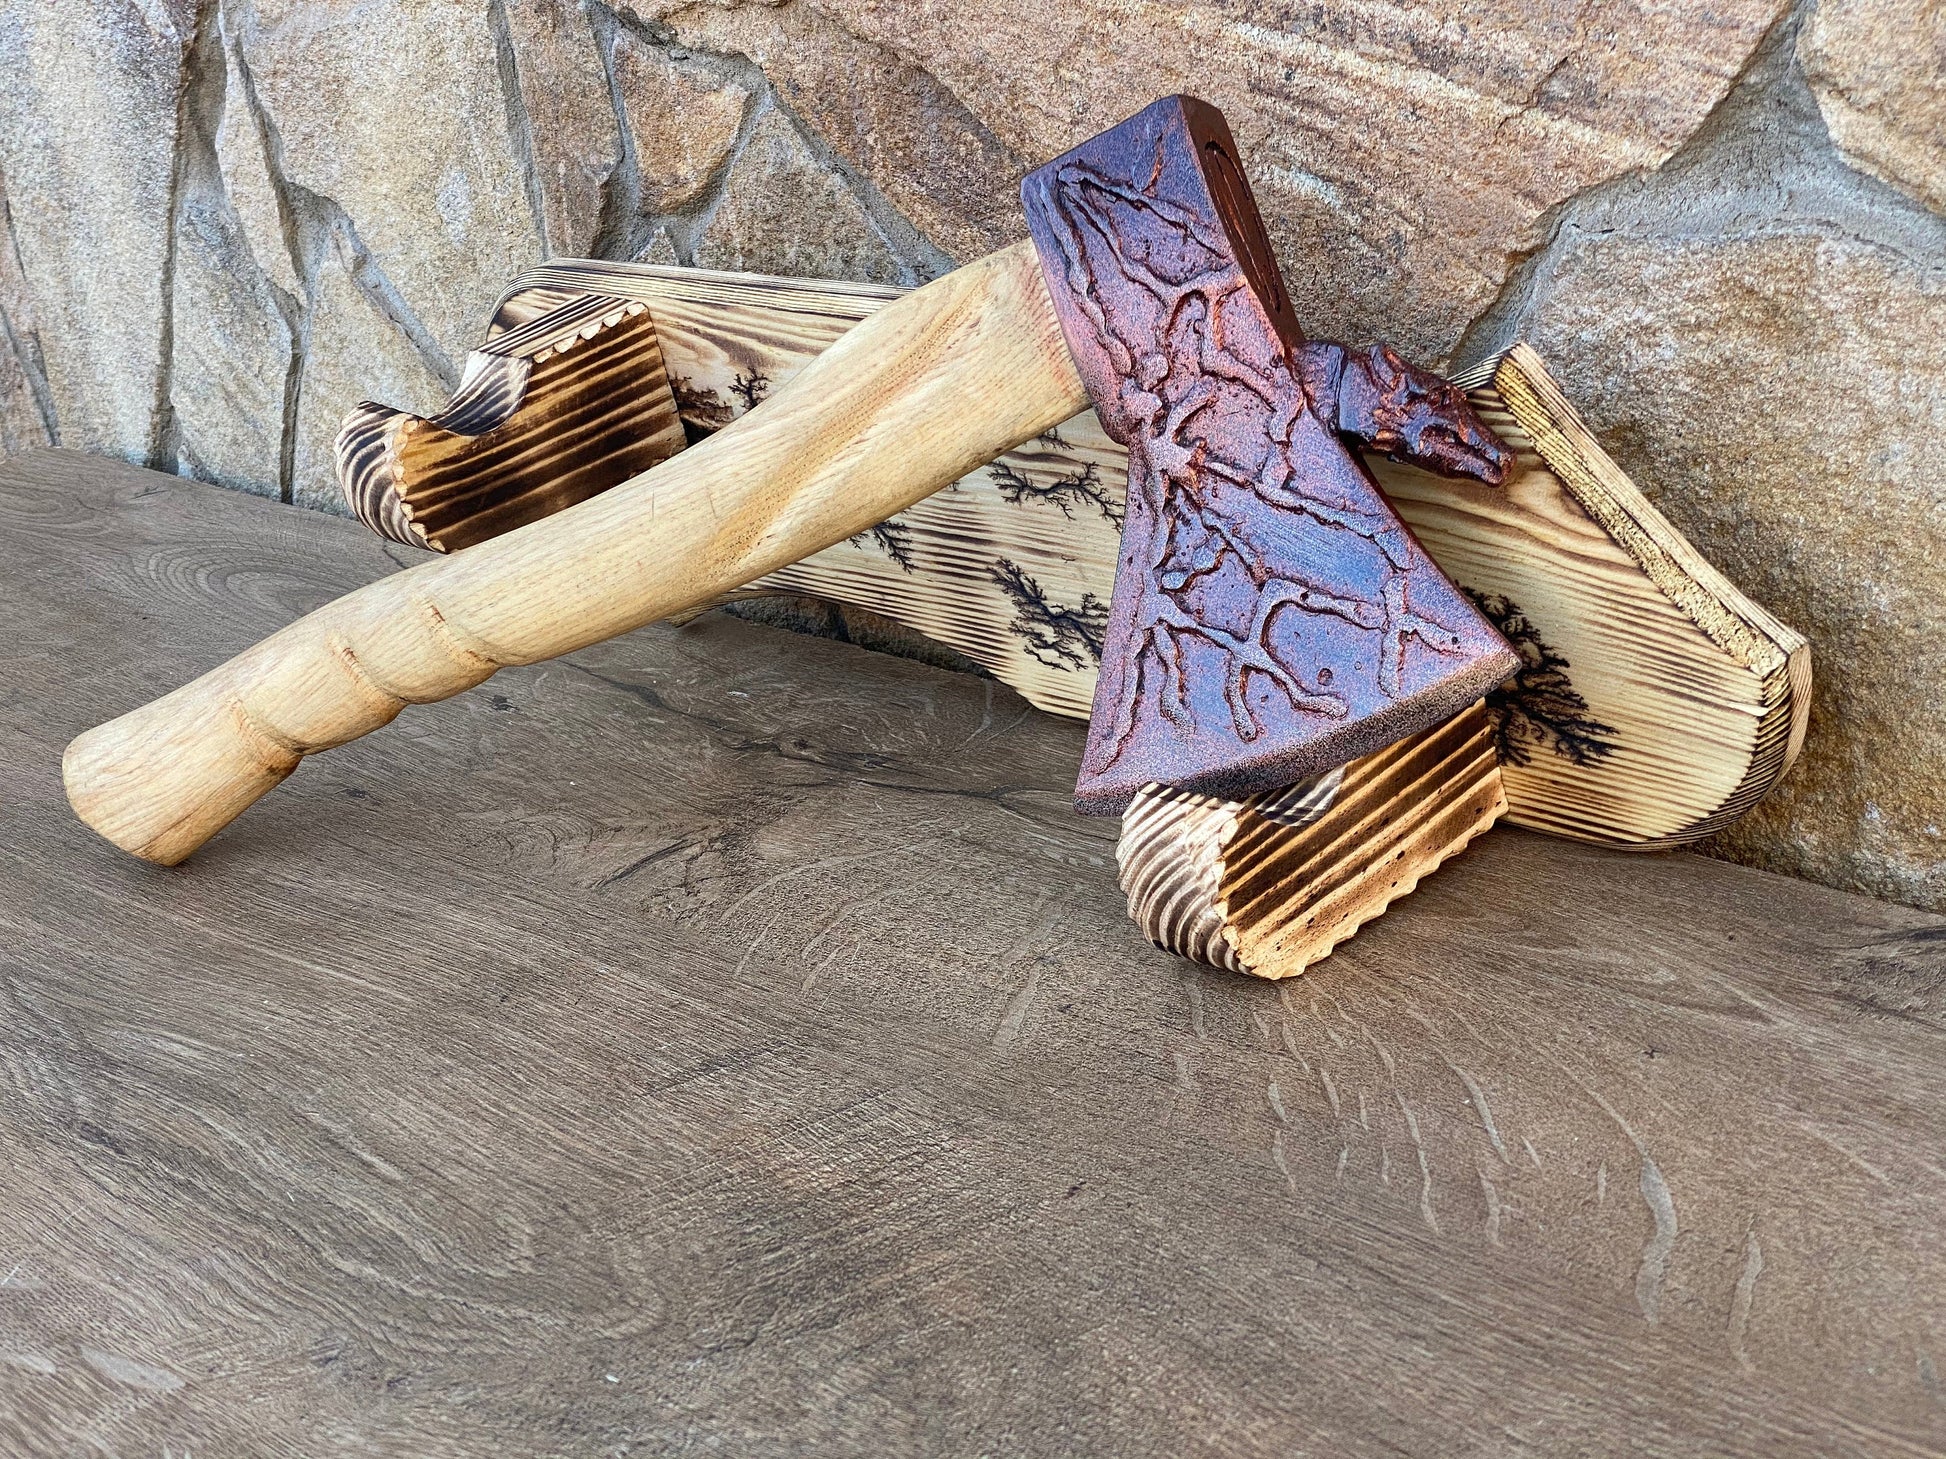 Wall axe holder, axe holder, axe accessory, axe stand, birthday, Christmas, wooden gift, wooden anniversary, 5th anniversary, axe,mens gift